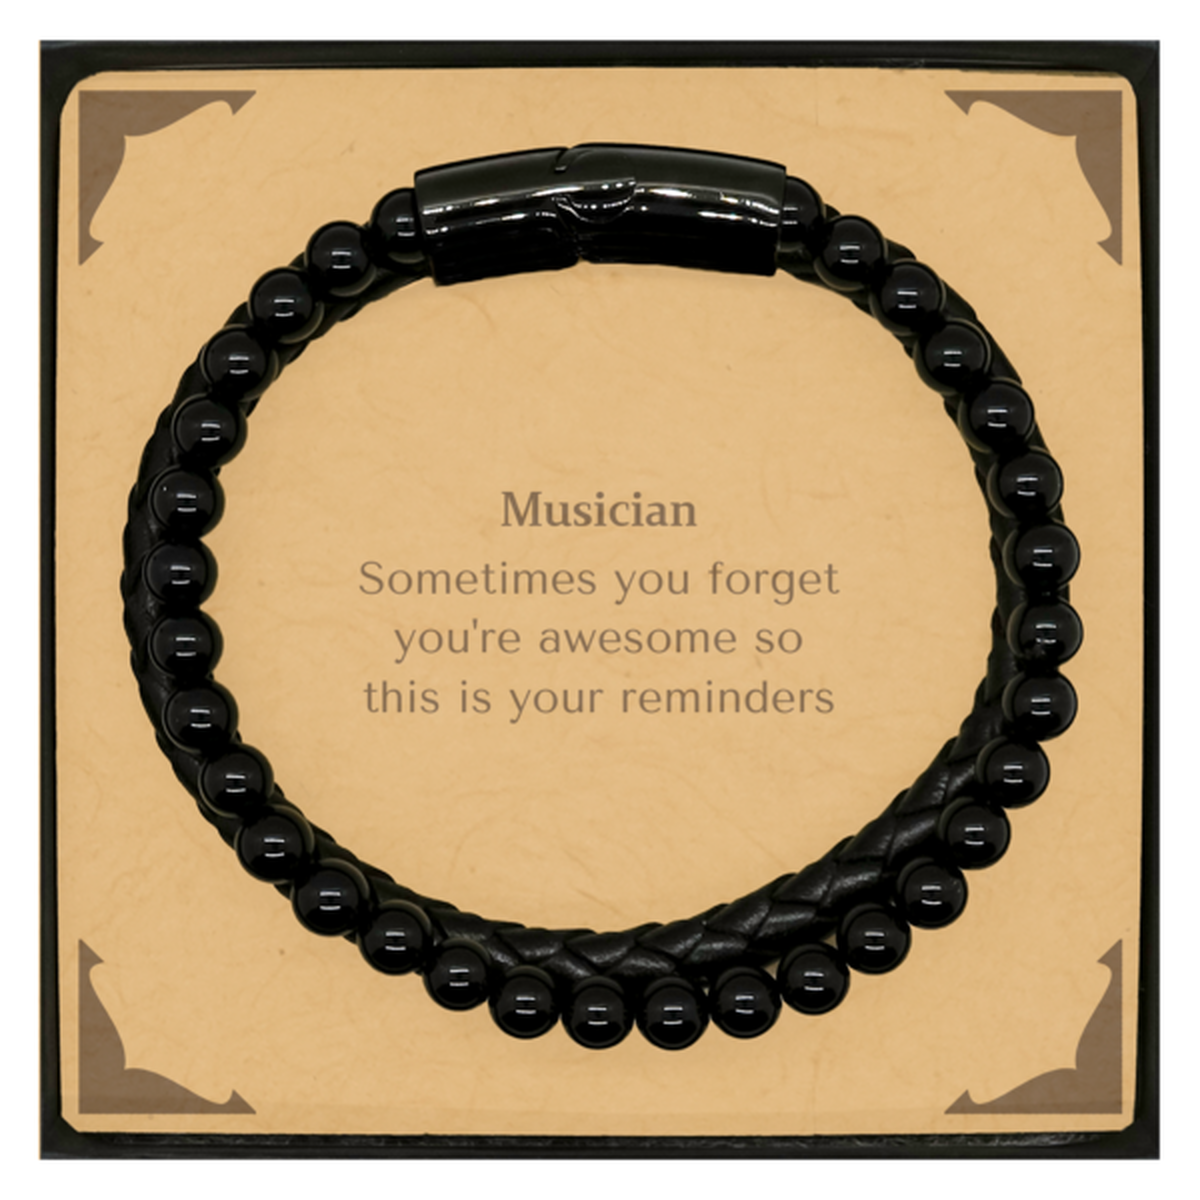 Sentimental Musician Stone Leather Bracelets, Musician Sometimes you forget you're awesome so this is your reminders, Graduation Christmas Birthday Gifts for Musician, Men, Women, Coworkers